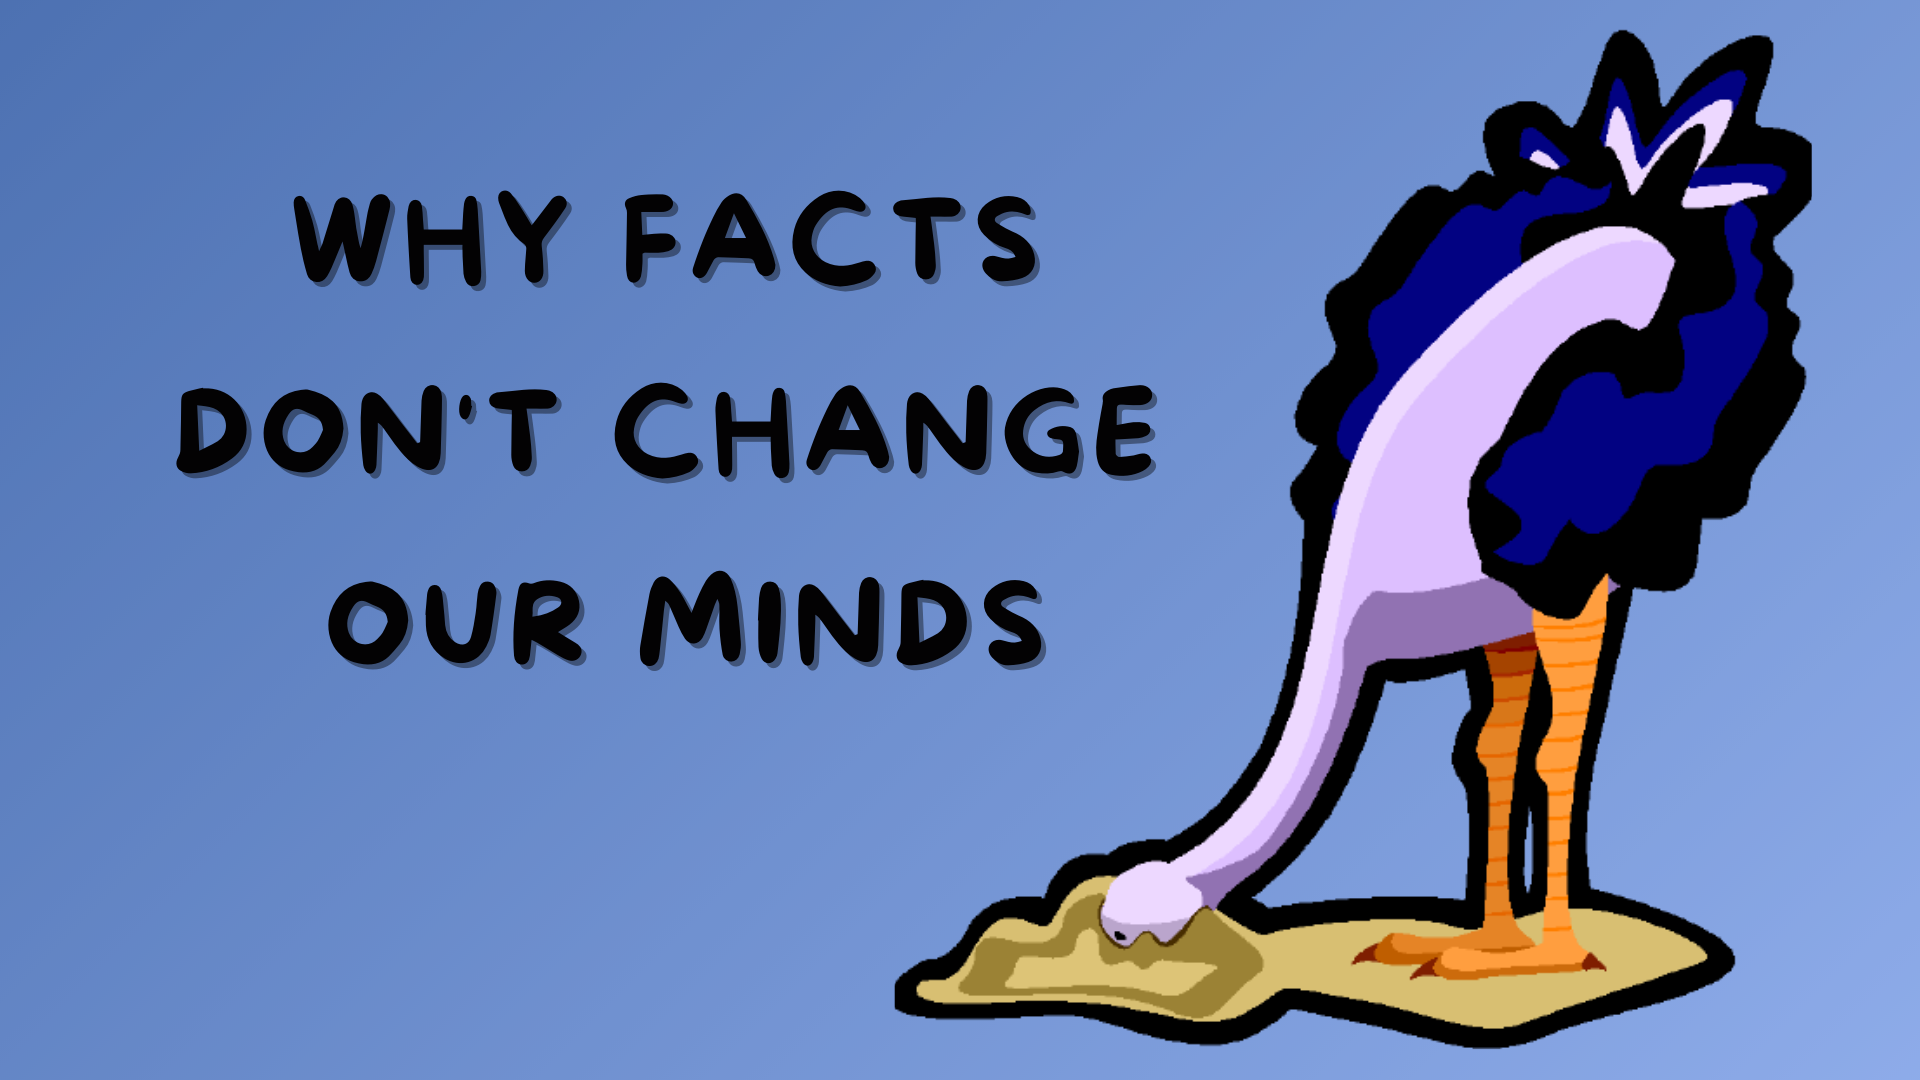 Why facts don't change our minds, ostrich with head in the sand, motivated reasoning, confirmation bias, and cognitive dissonance